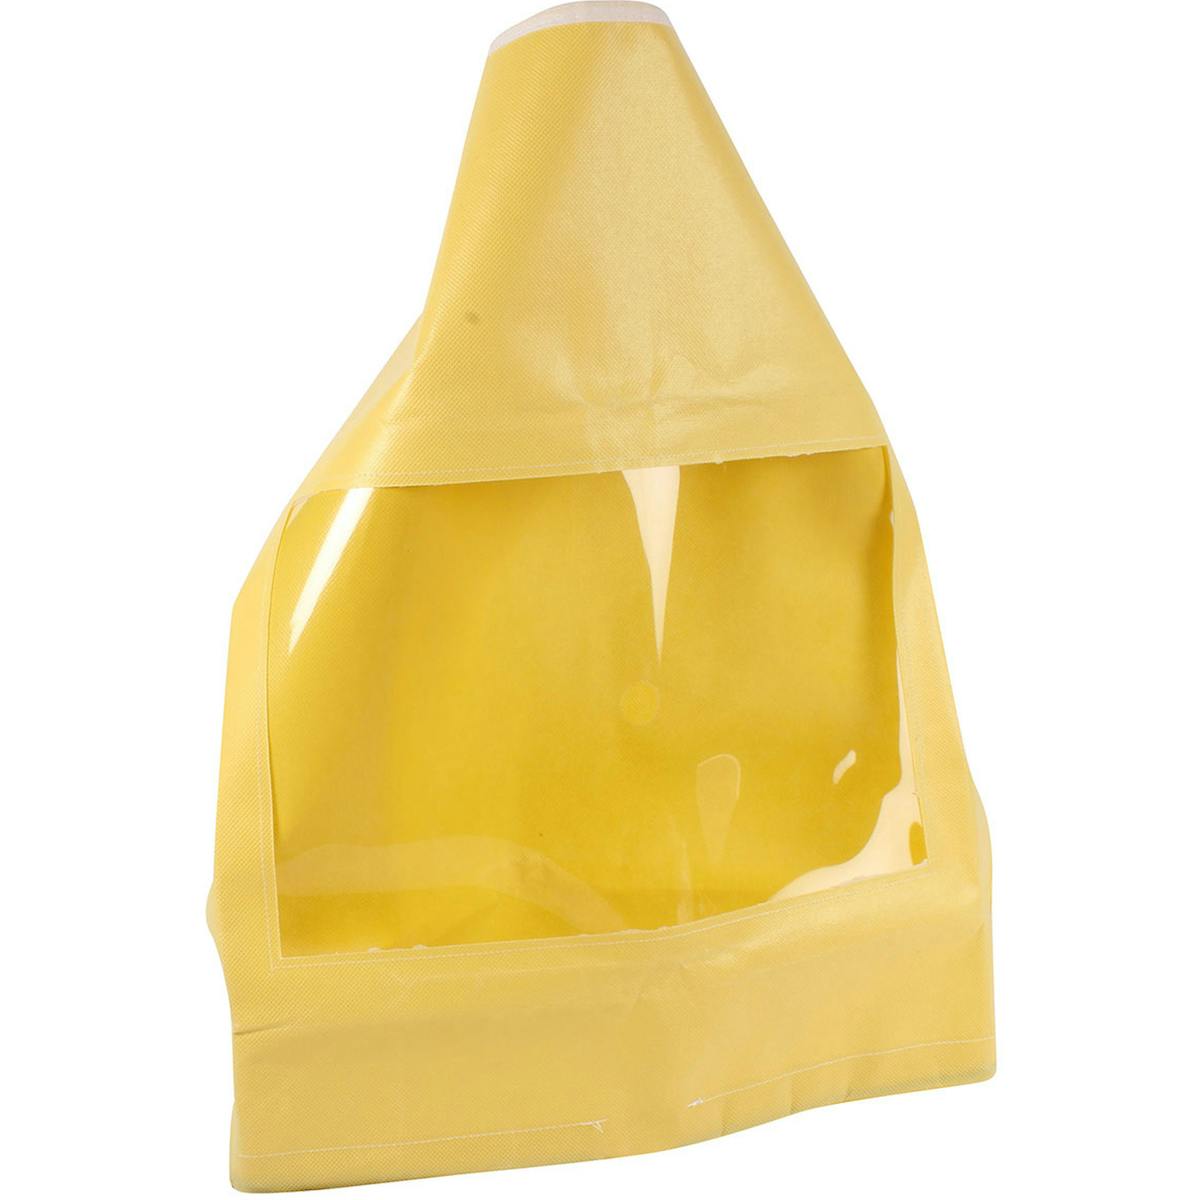 Replacement Hood for Bitrex Fit Test Kit, Yellow (270-RPHOOD) - OS_0